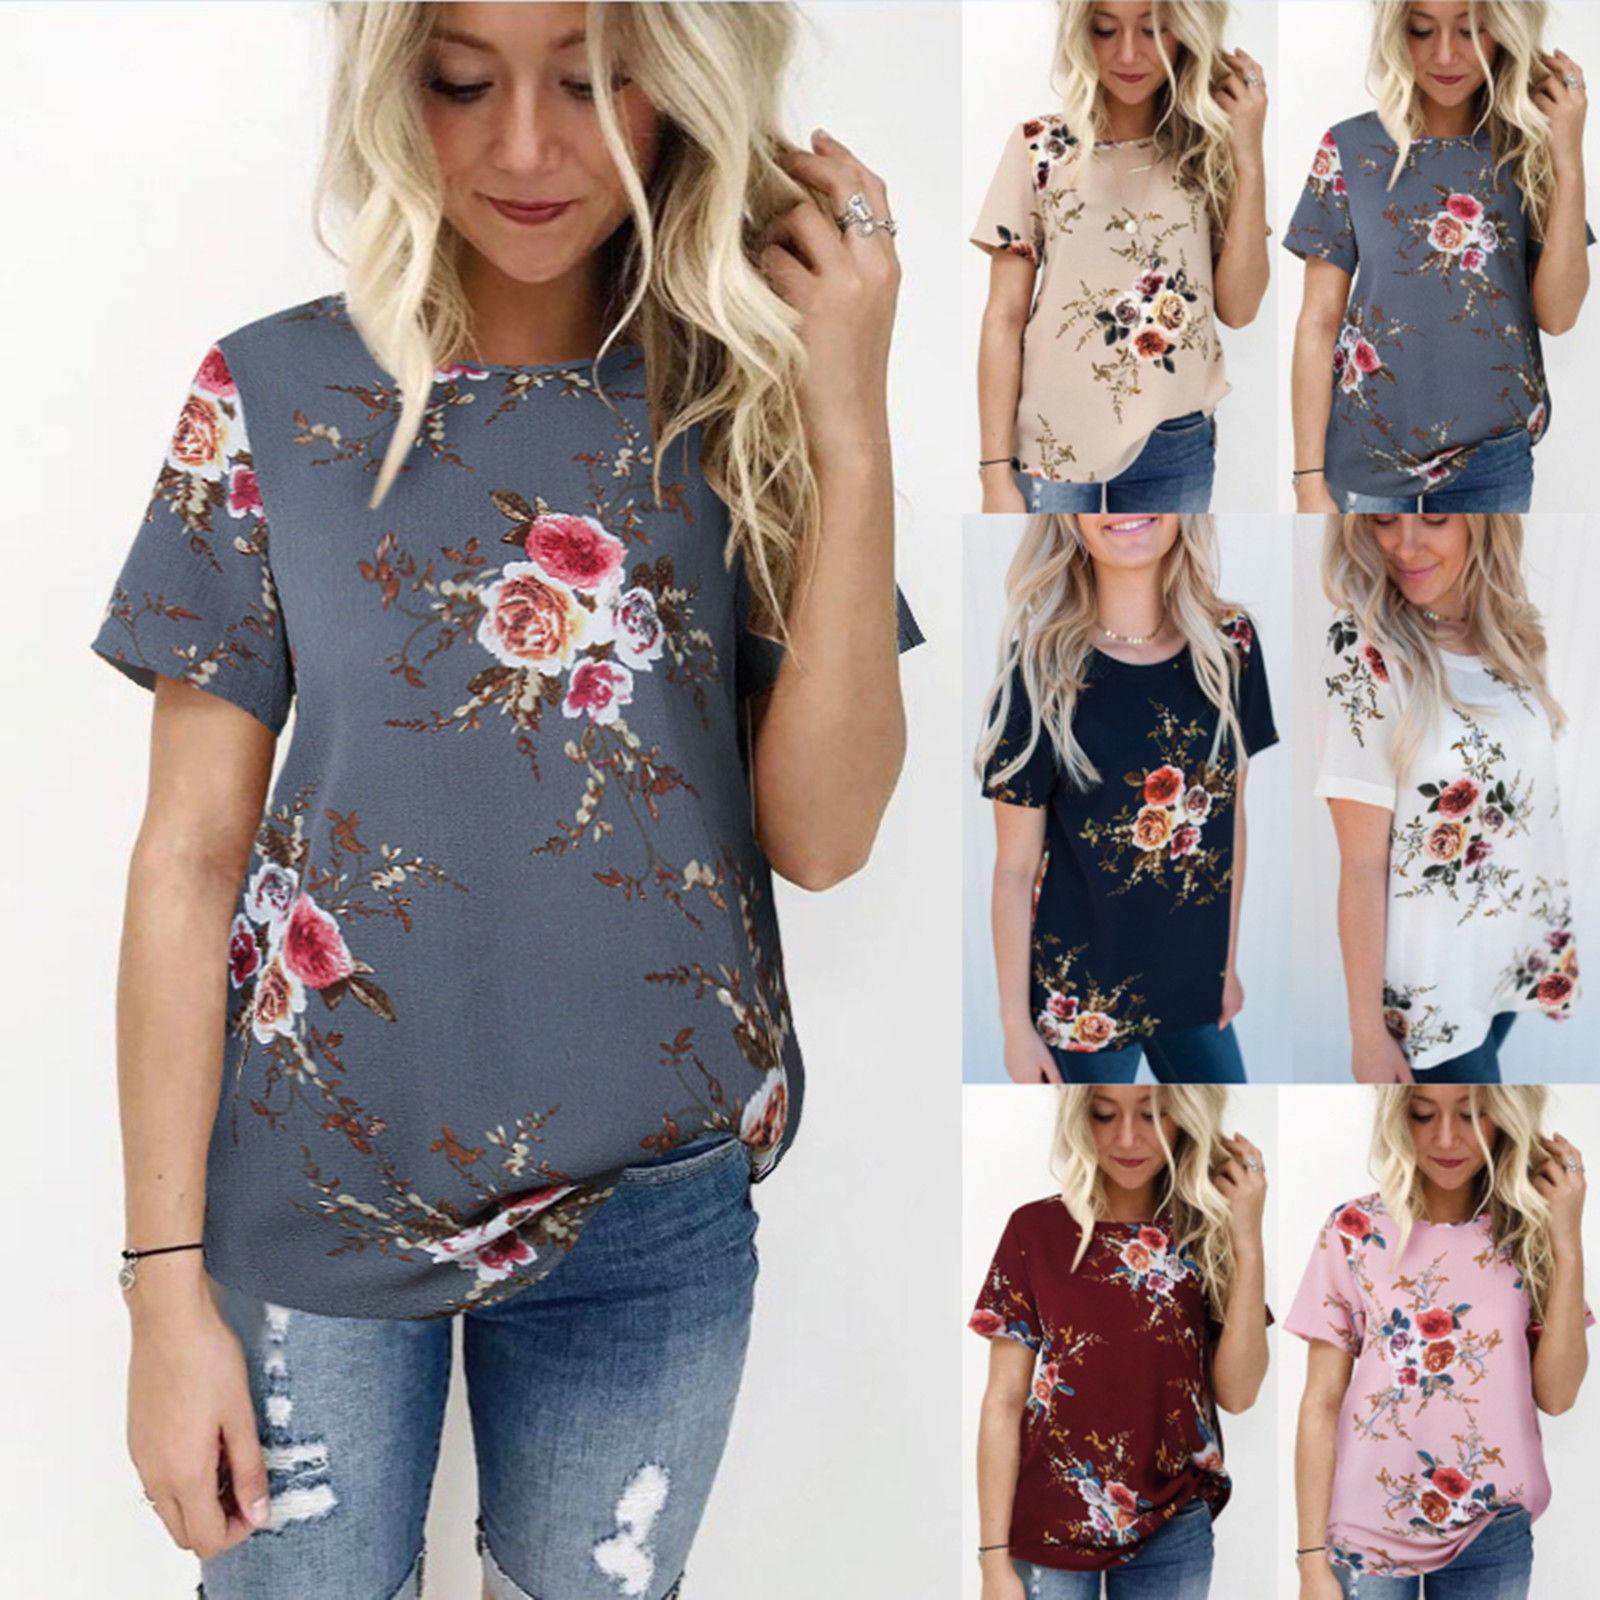 Plus Size Women's Blouse Short Sleeve Floral Print T-Shirt Comfy Casual Tops Hot: Printed T-Shirt  